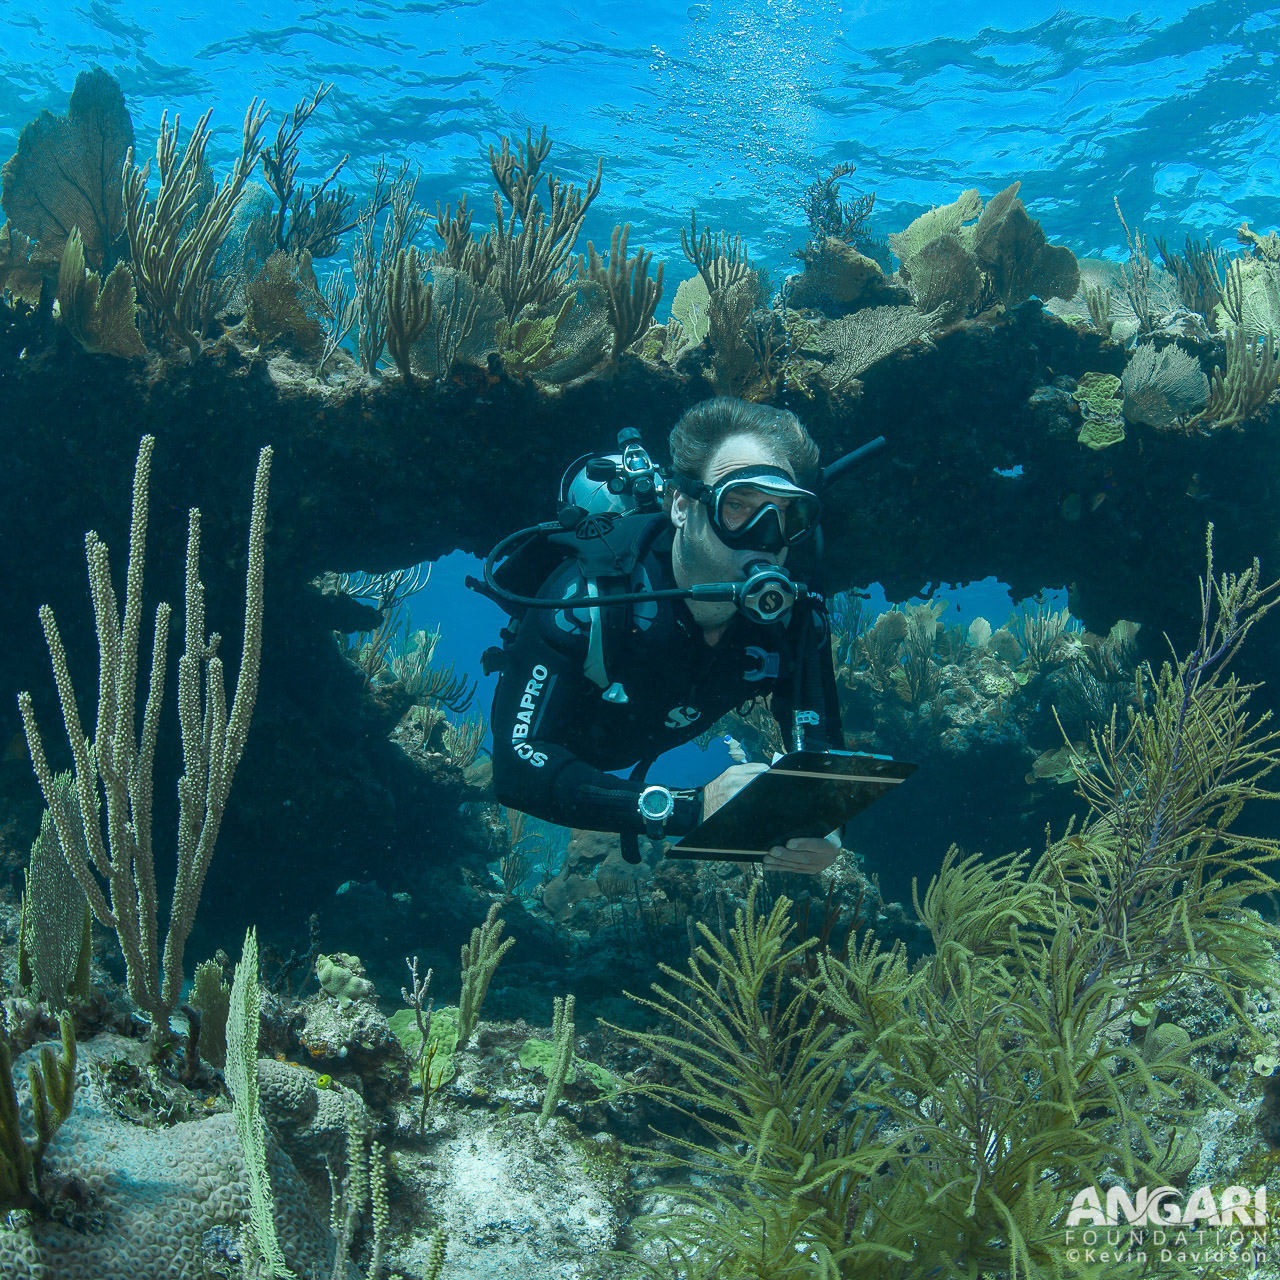 Emerges from a swim-through reef tunnel during one of my surveys off Abaco, The Bahamas. PC: Kevin Davidson